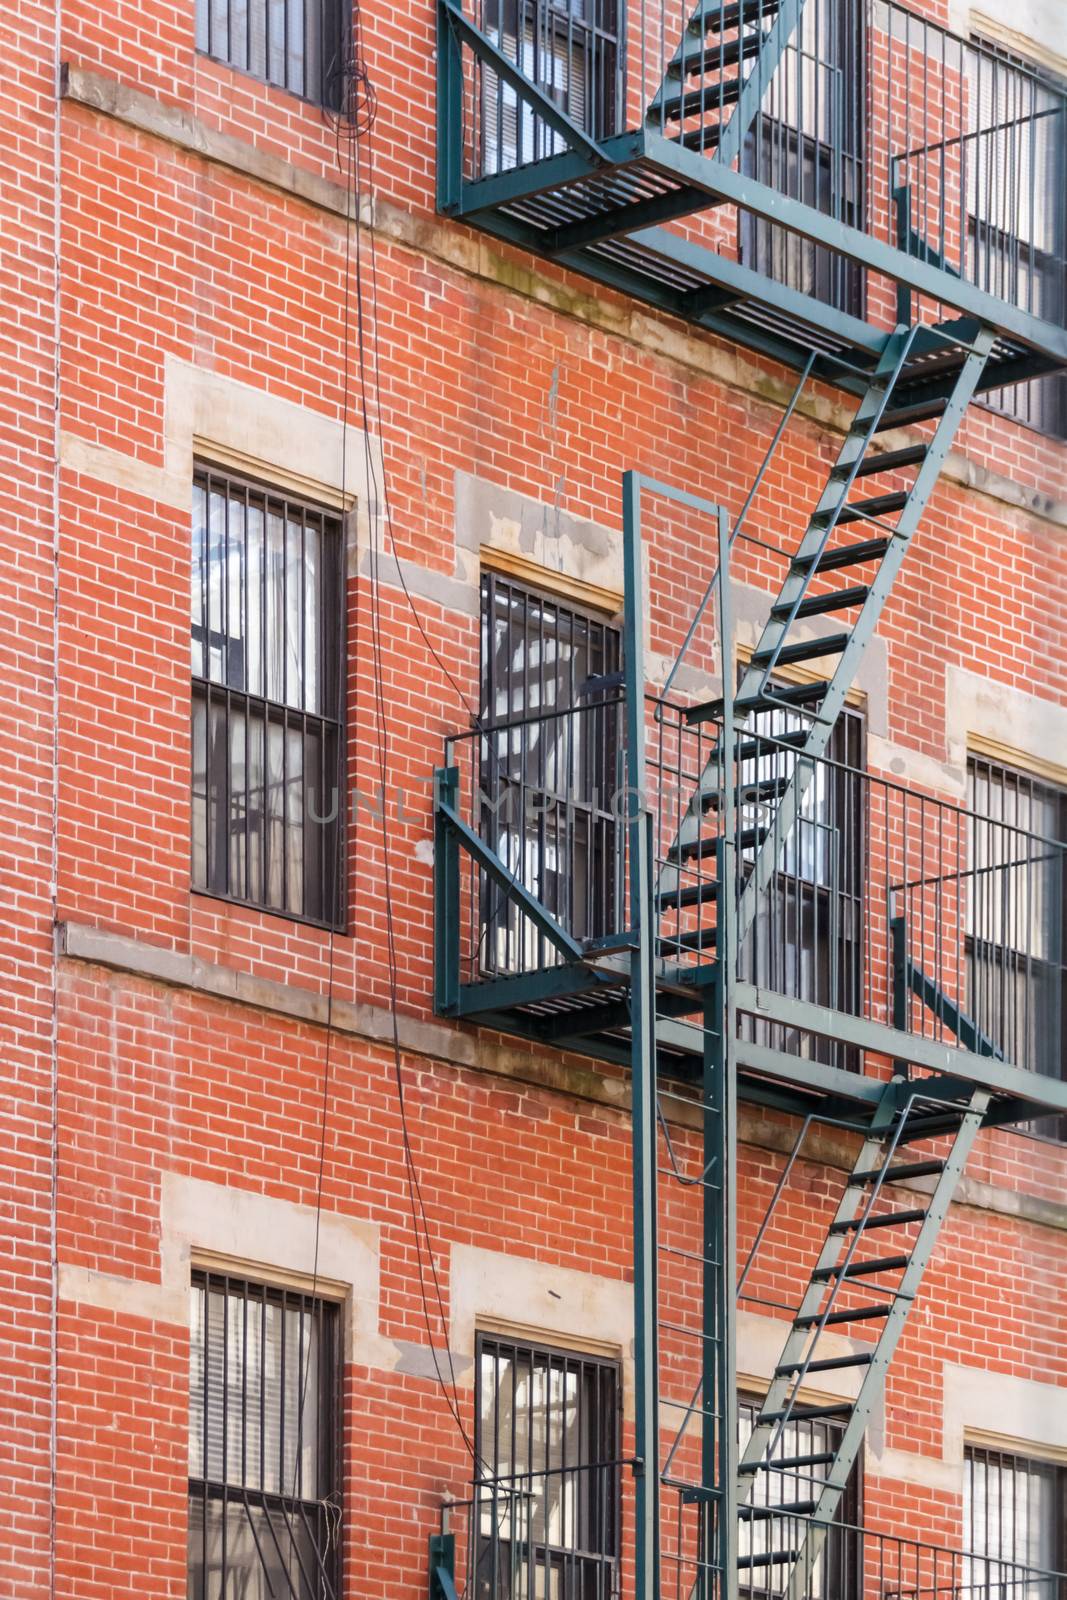 Typical New York fire escape ladders and balconies